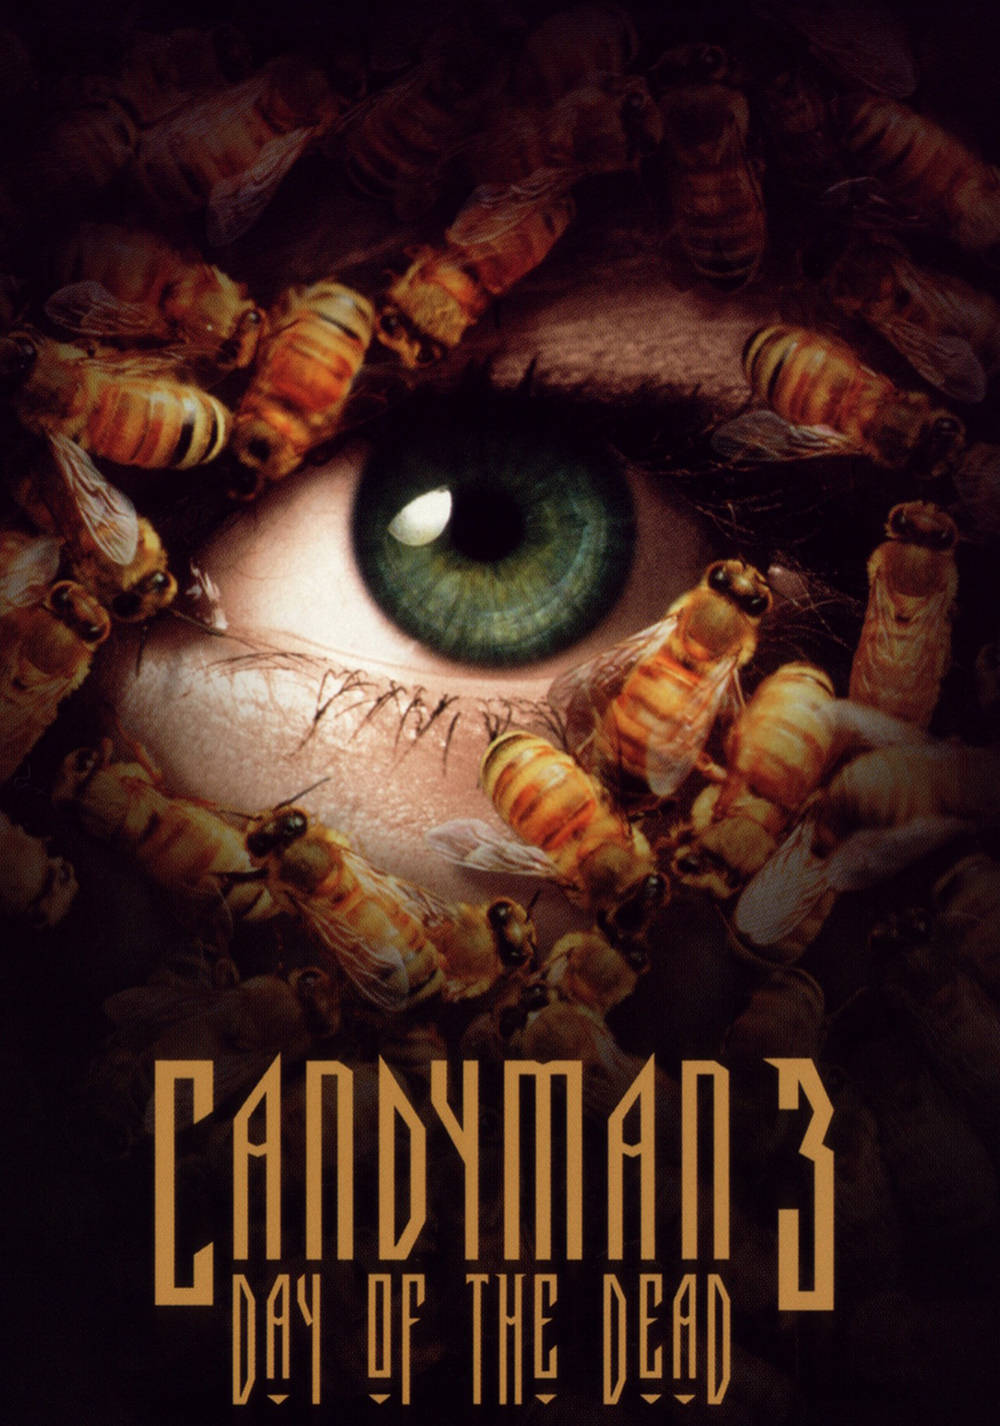 Candyman 3 Day Of The Dead Background